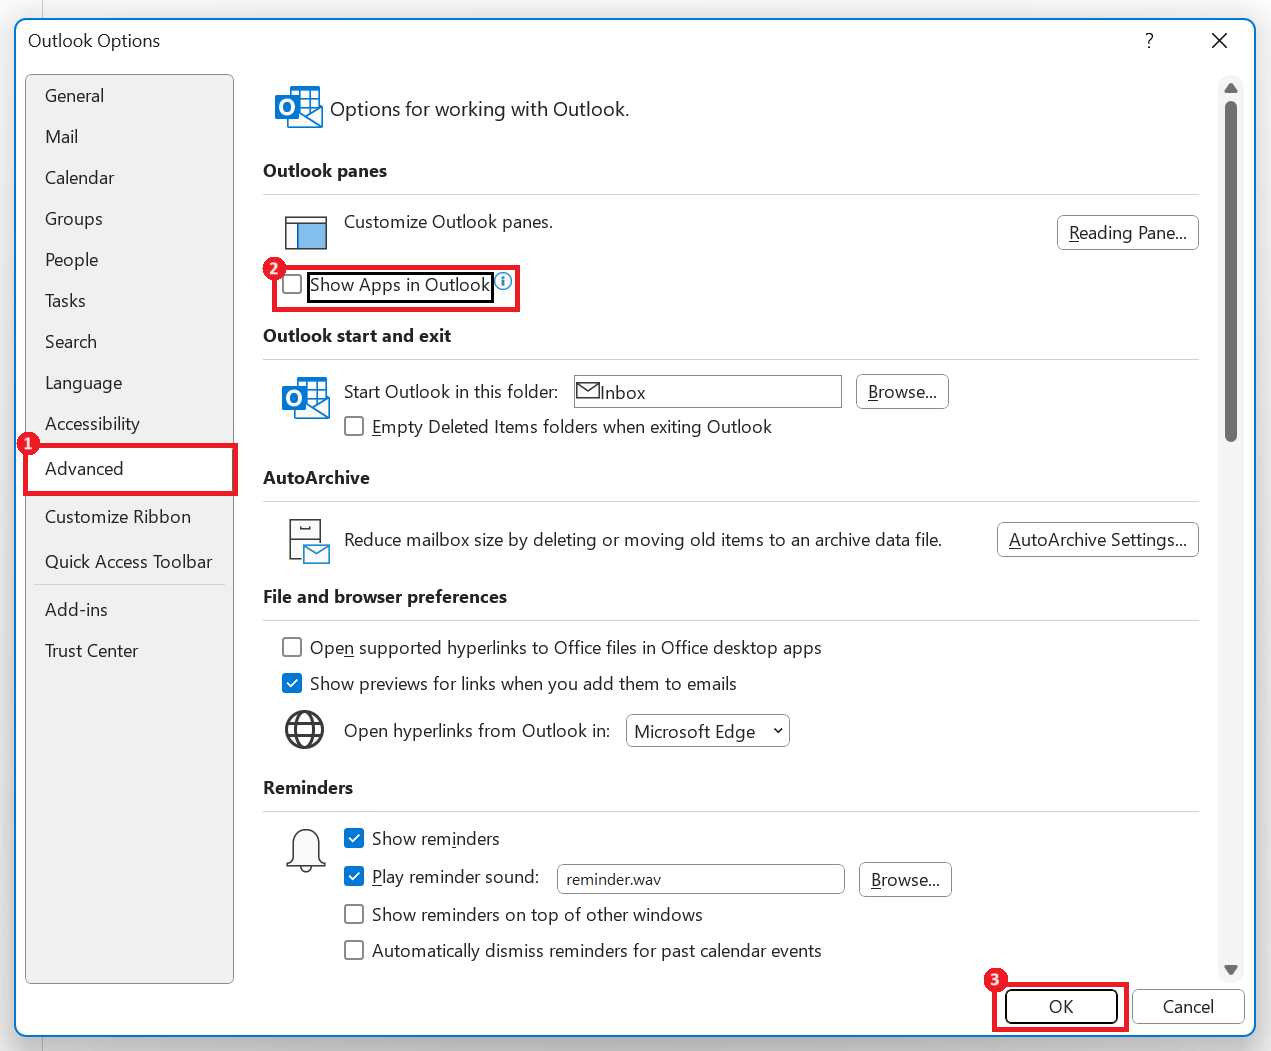 "Show Apps in Outlook" highlighted in Outlook Options pop-up menu